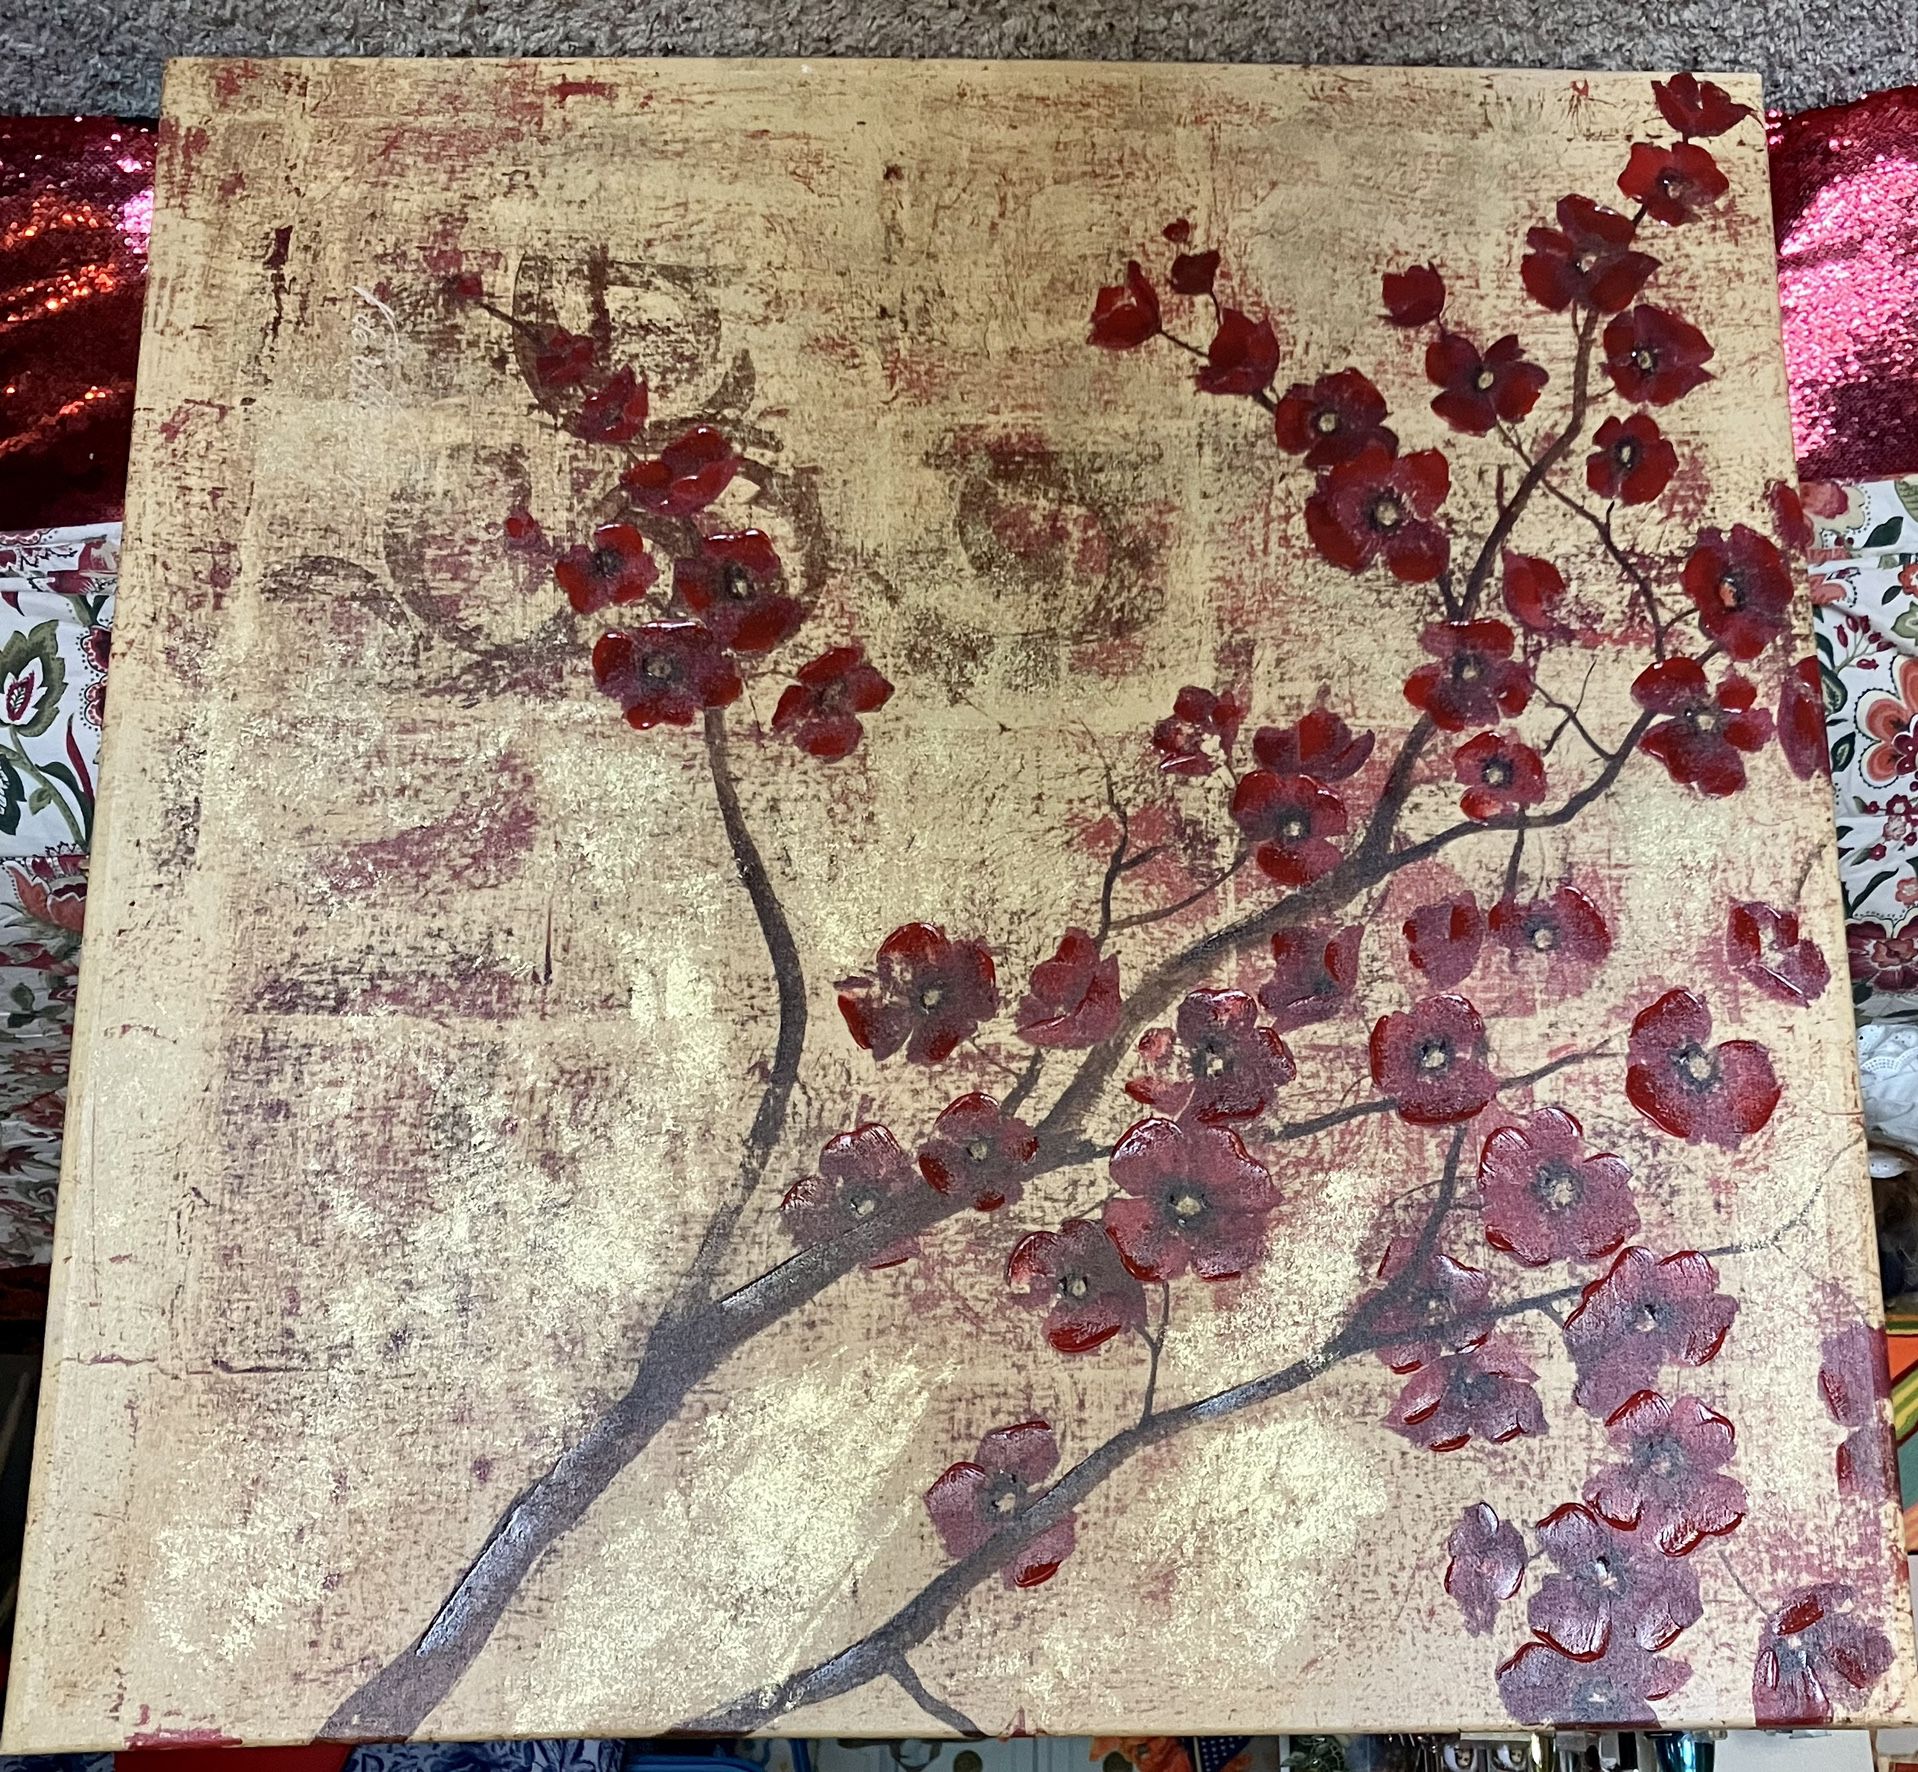 FABRICE DE VILLENEUVE PAINTING With CERTIFICATE AUTHENTICITY 39.5" x 39.5" GOLD METALLIC RED FLOWERS FLORAL HOME DECOR‼️ Price Is FIRM ‼️